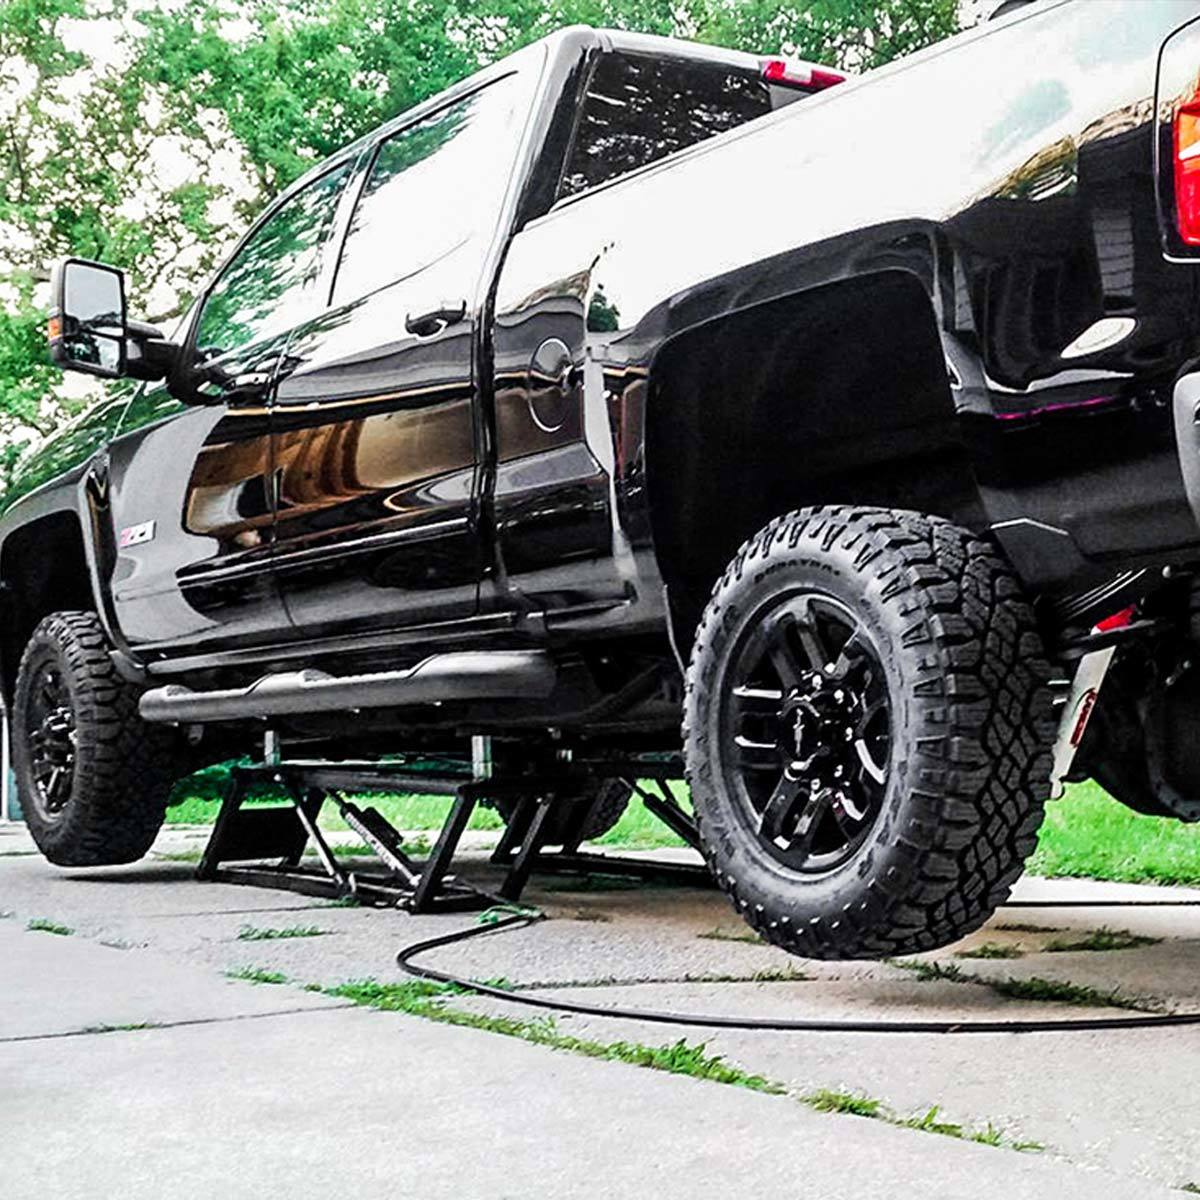 Image of QuickJack from the rear with Black pickup lifted